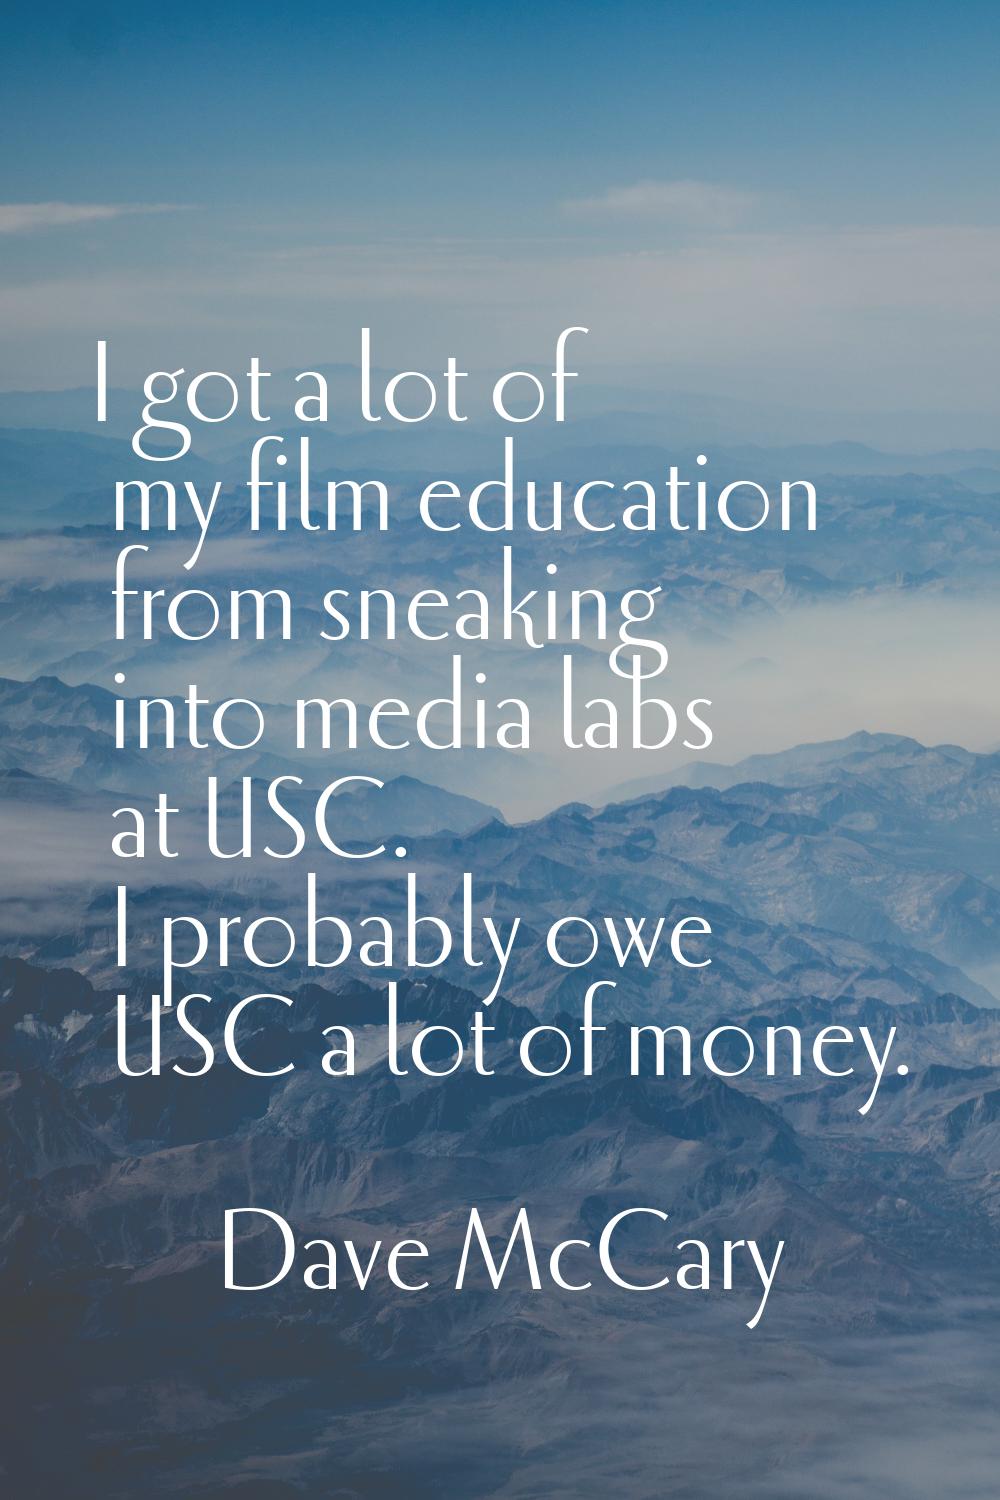 I got a lot of my film education from sneaking into media labs at USC. I probably owe USC a lot of 